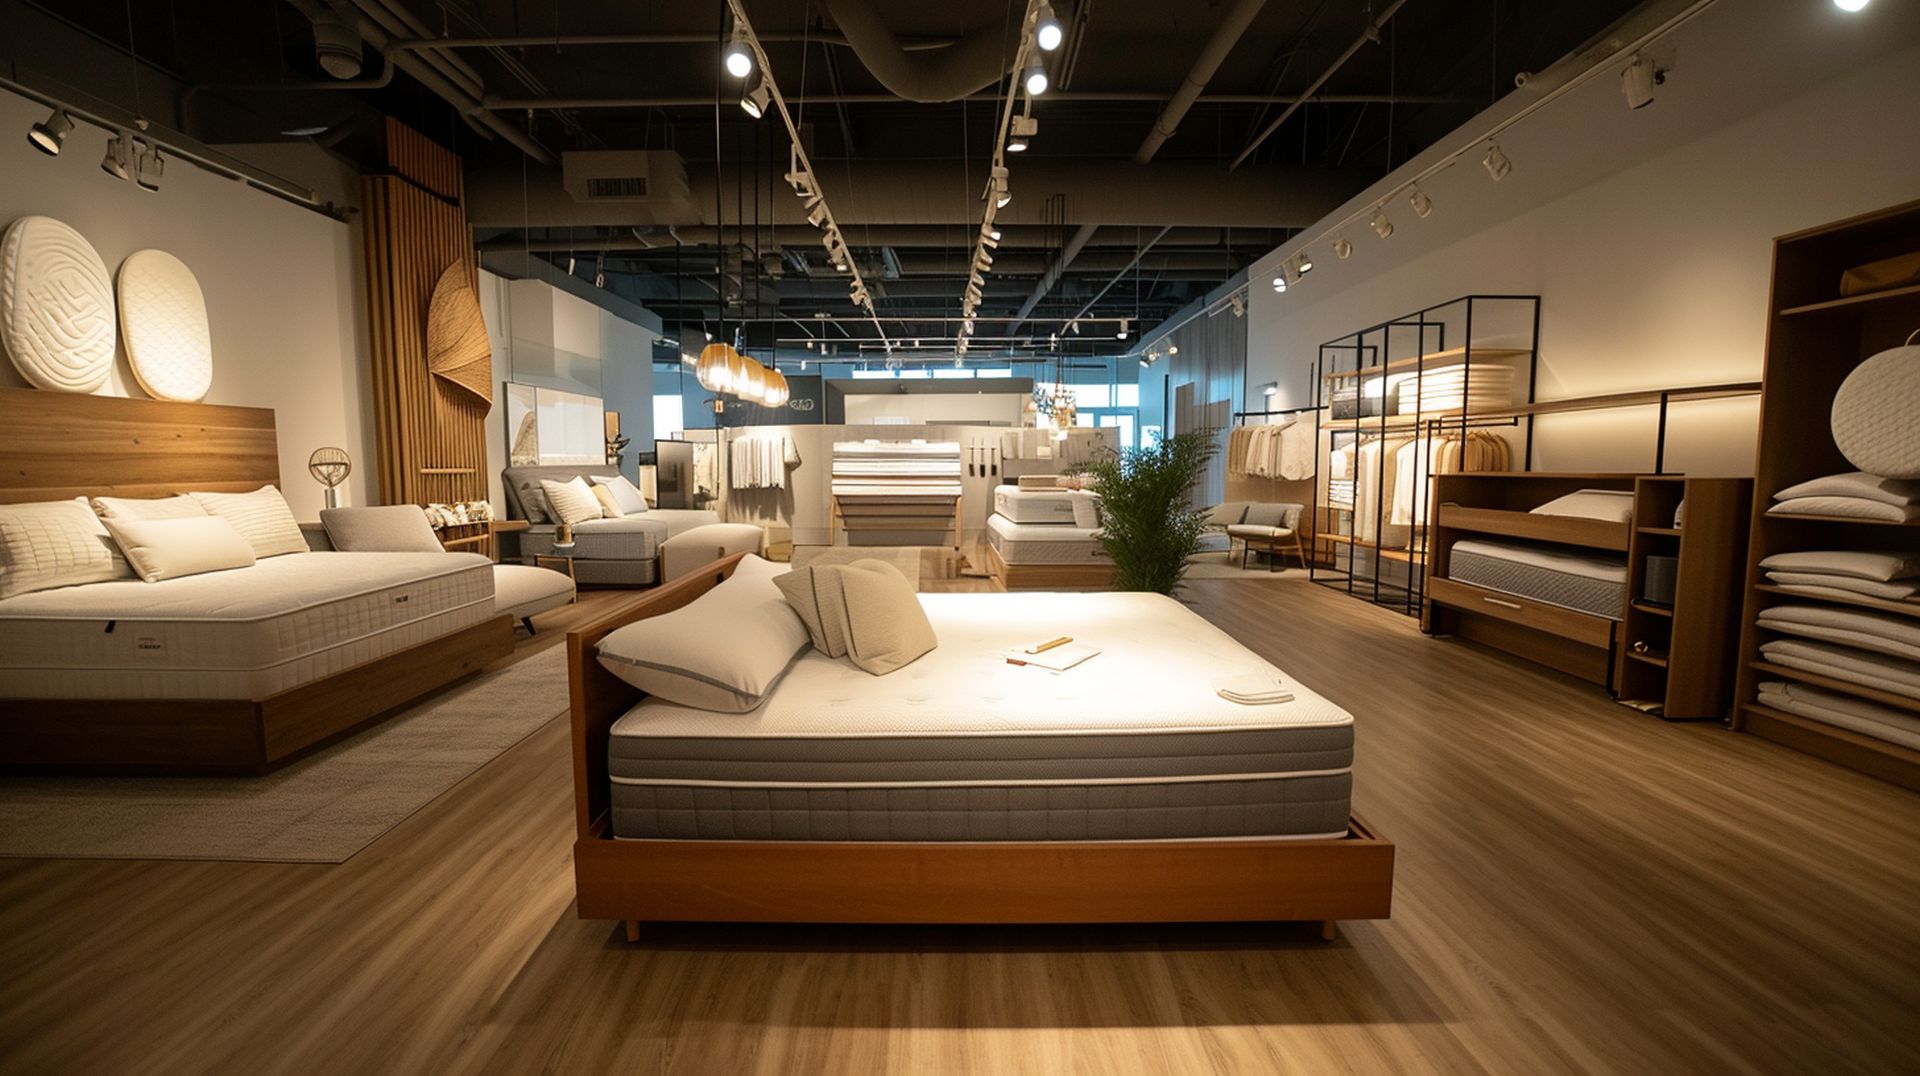 If you're looking for a new bed, mattress stores in Haverhill offer the best customer and delivery service, financing, and warranties in Massachusetts